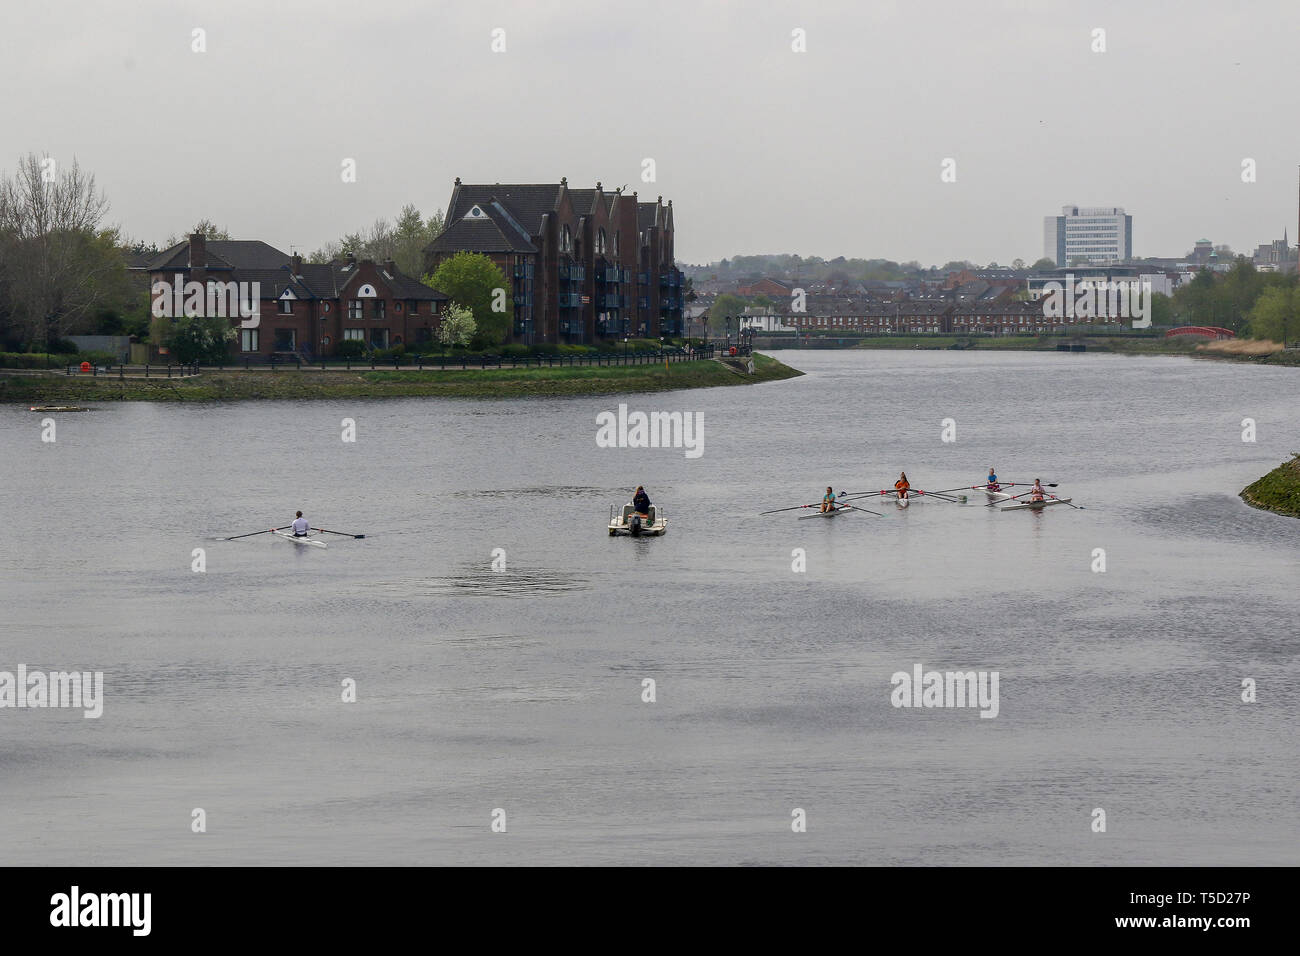 Belfast, Northern Ireland, UK. 24 April 2019.  UK weather: a hazy but mild day in Belfast with overcast skies. Rowers on the River Lagan. Credit: CAZIMB/Alamy Live News. Stock Photo